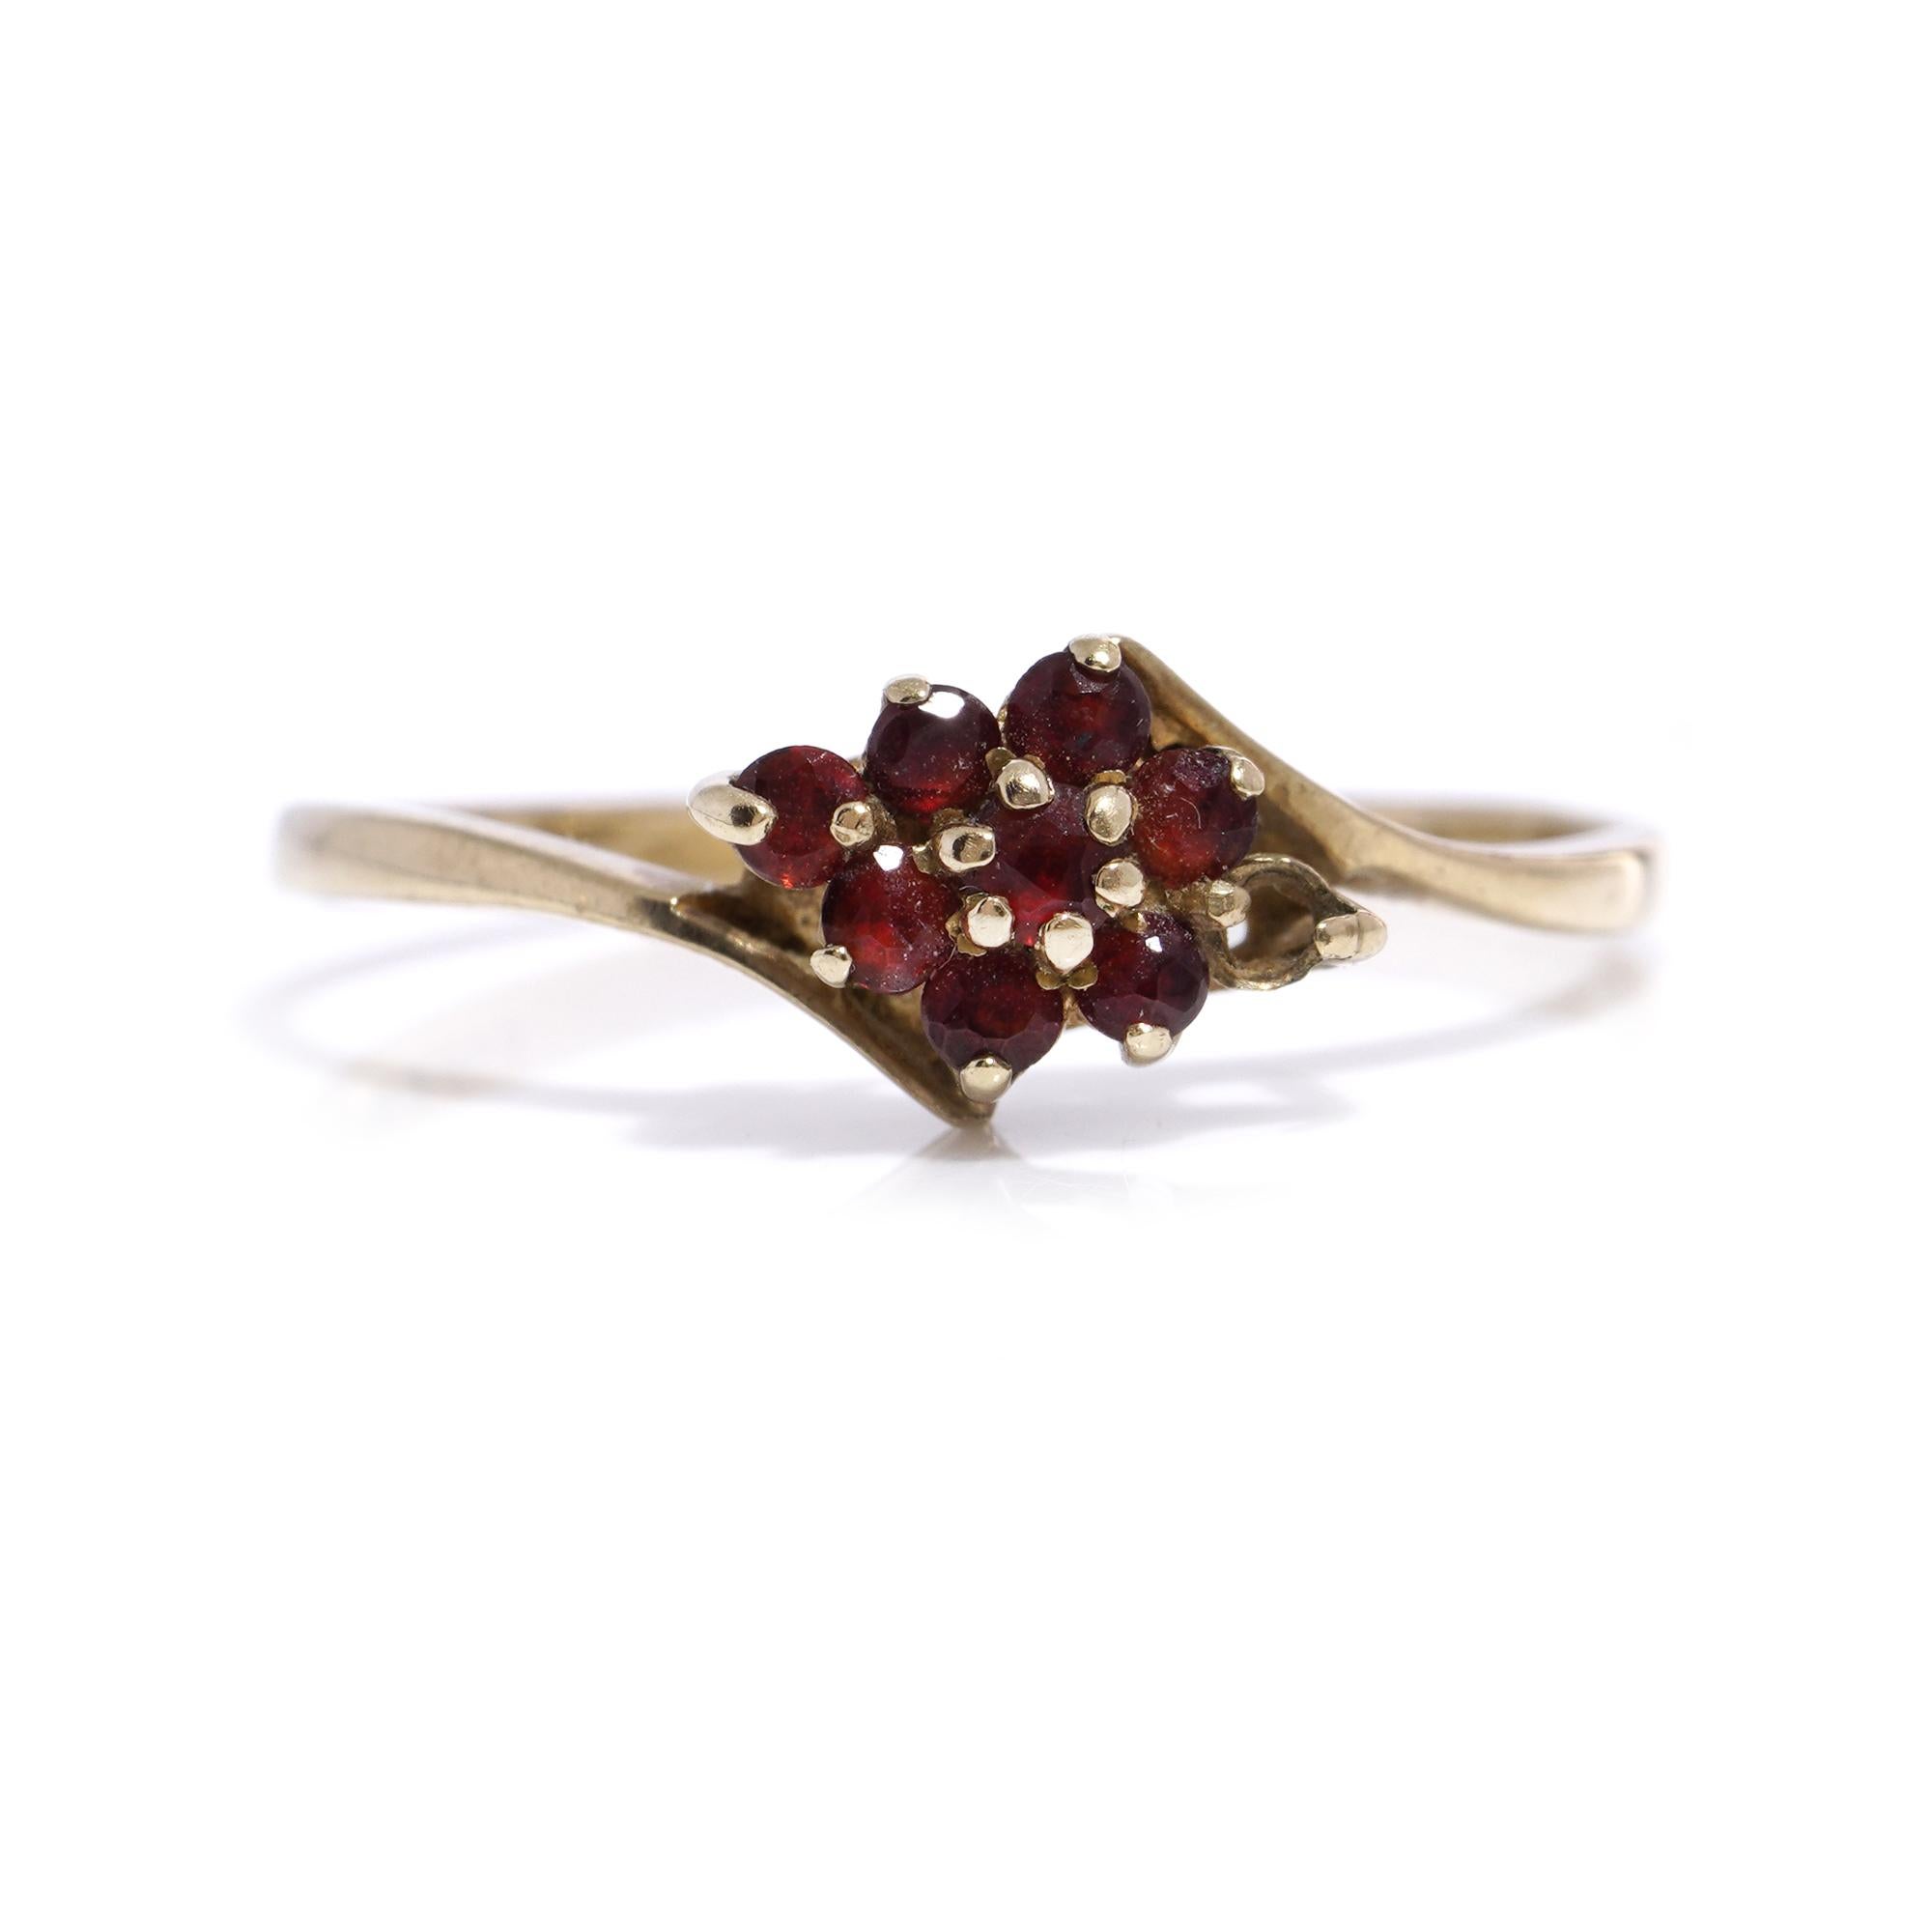 Vintage 9kt yellow gold garnet cluster ring.
Made in England, London, 1984
Fully hallmarked.

Dimensions -
Finger Size (UK) = O 1/2 (EU) = 56.5 (US) = 7.75
Weight: 1.00 gram

Garnets -
Cut: Round faceted
Quantity of stones: 7
Carat weight: 0.21